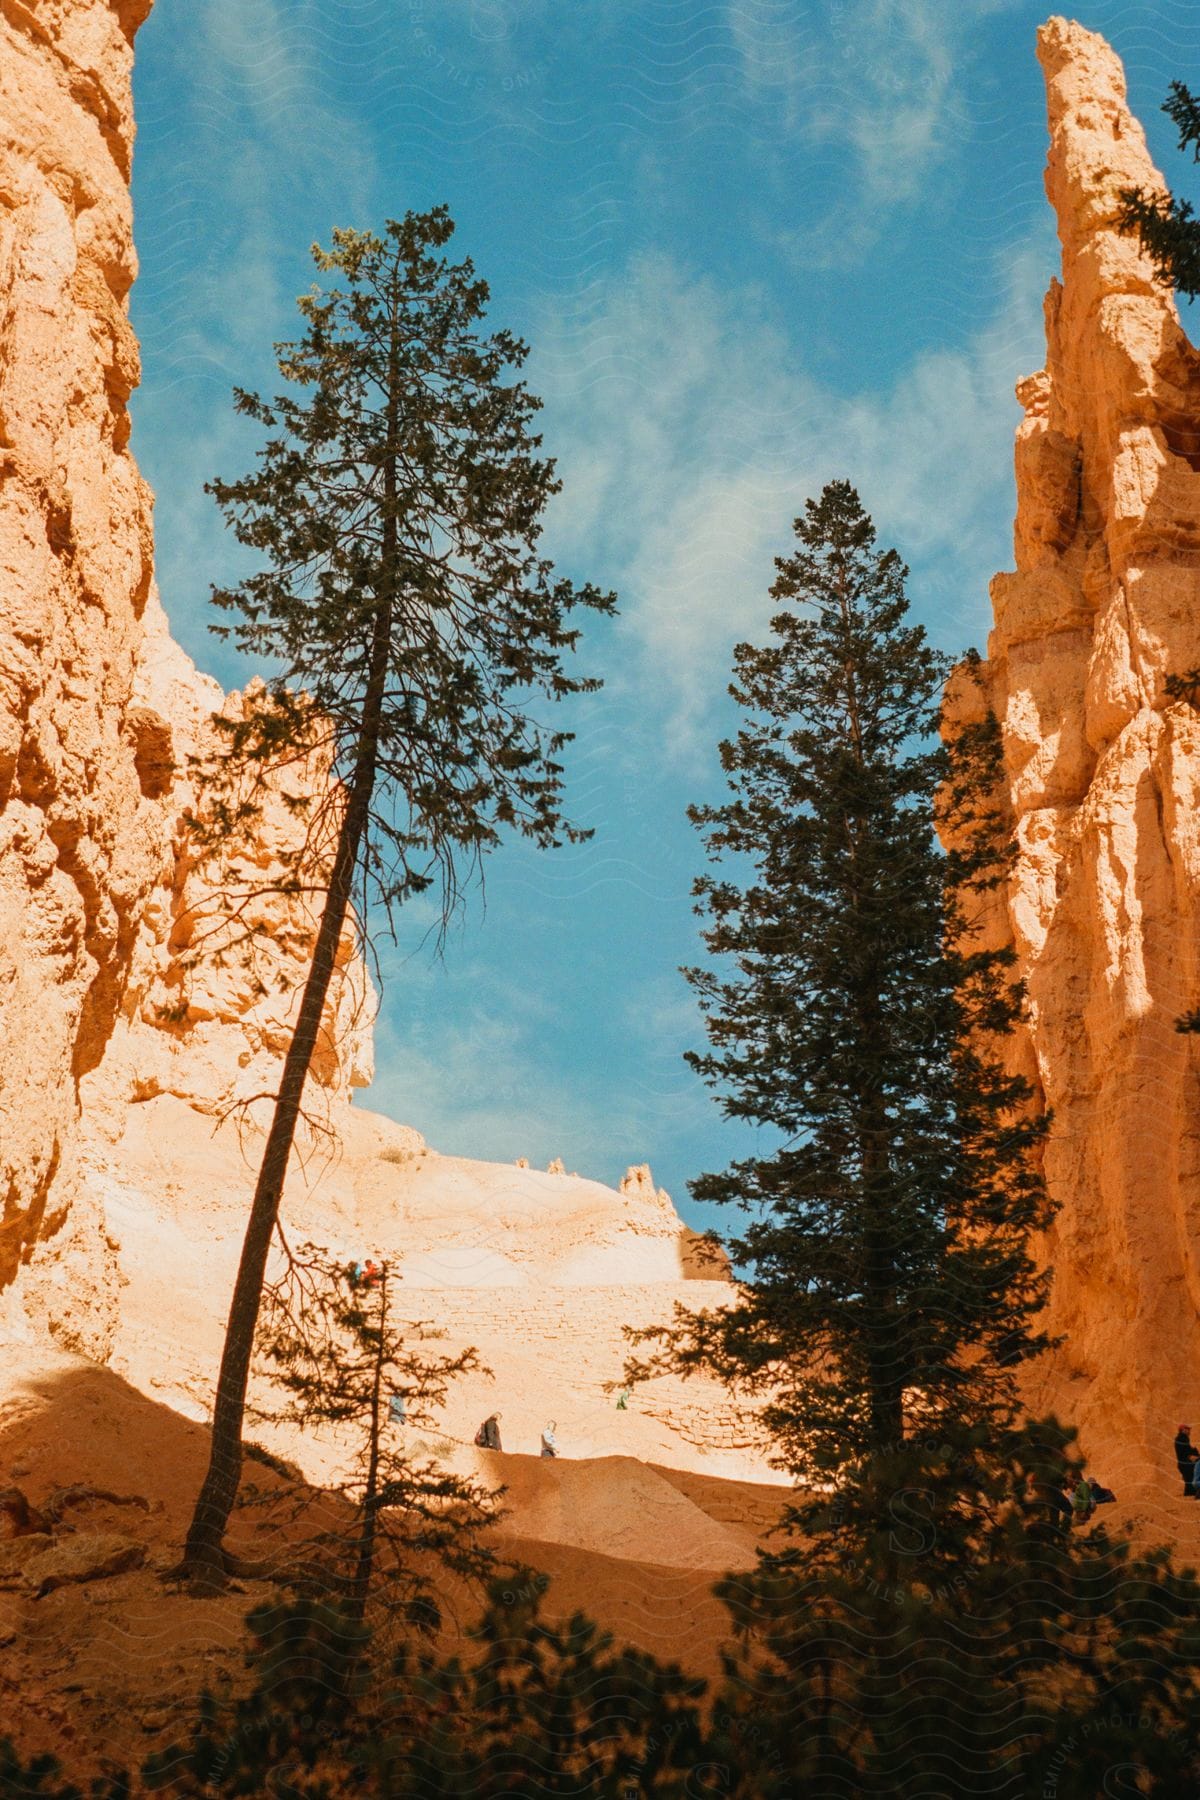 A view at the bottom of a canyon with some trees and rocks on either side of it.